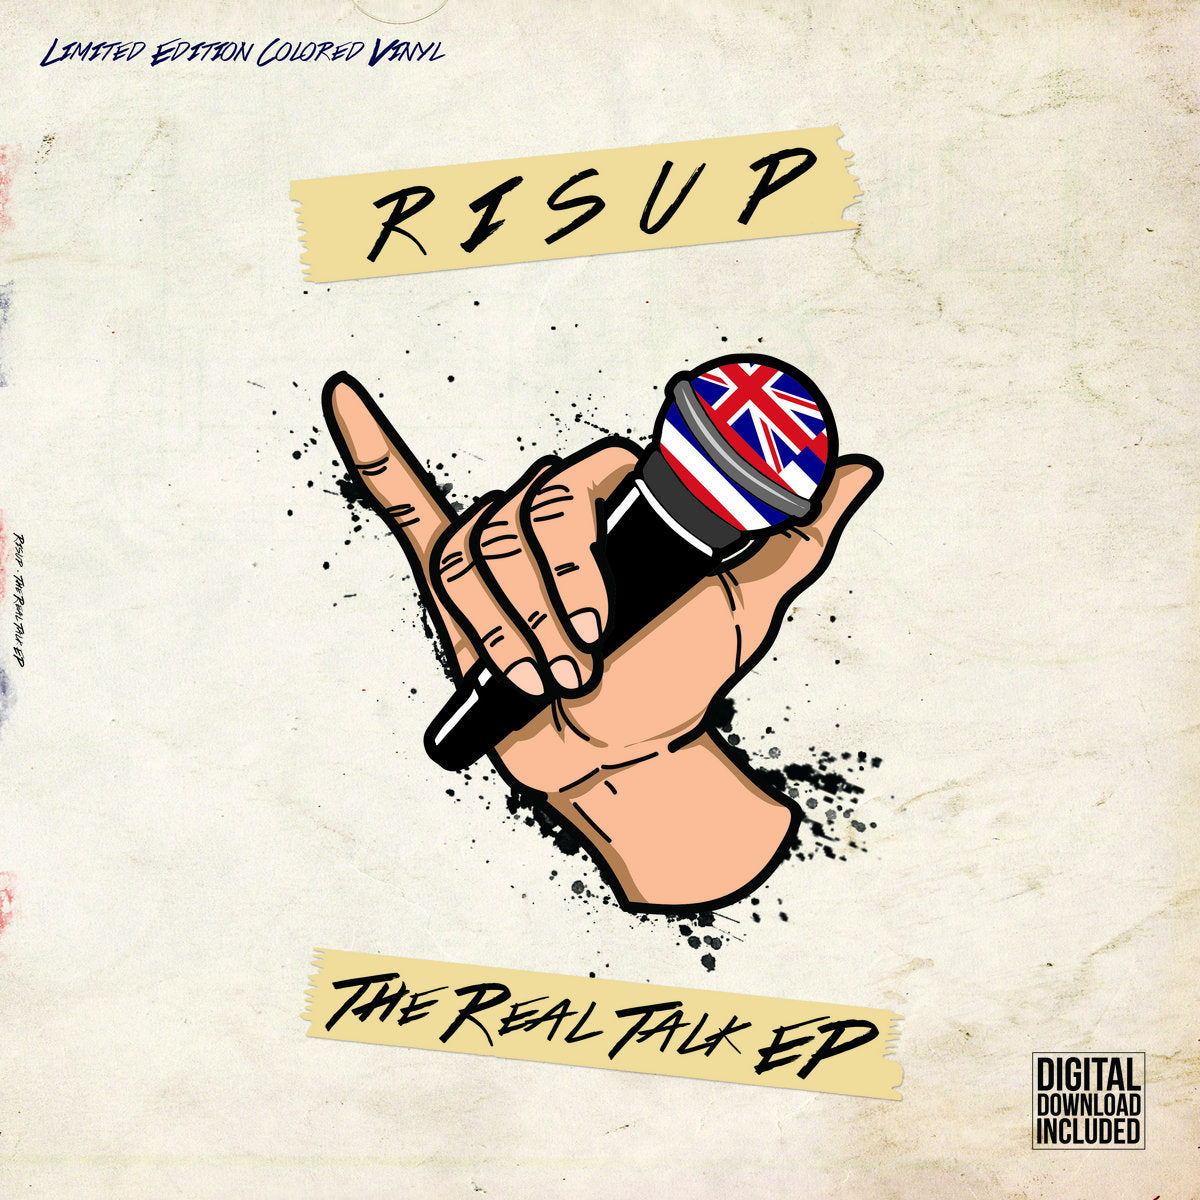 Risup - The Real Talk EP